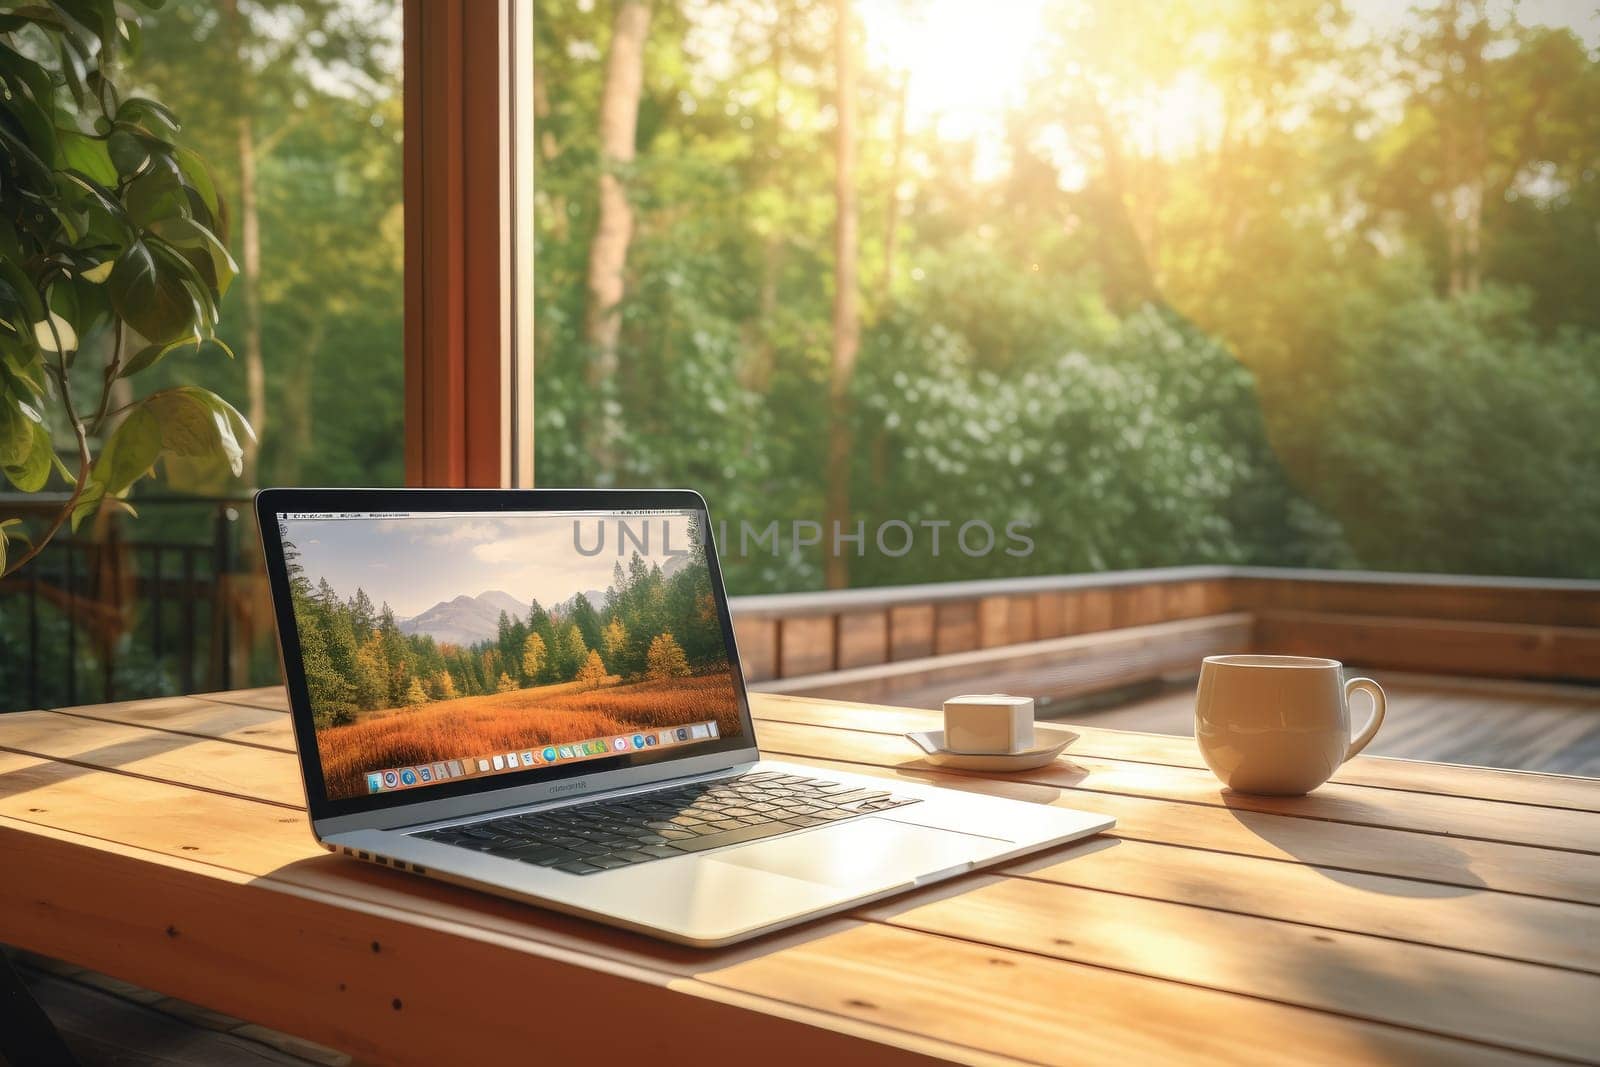 Tranquil nature scene with a laptop on a table, showcasing a perfect remote work setup amidst the serene beauty of a lake and mountains in the background.